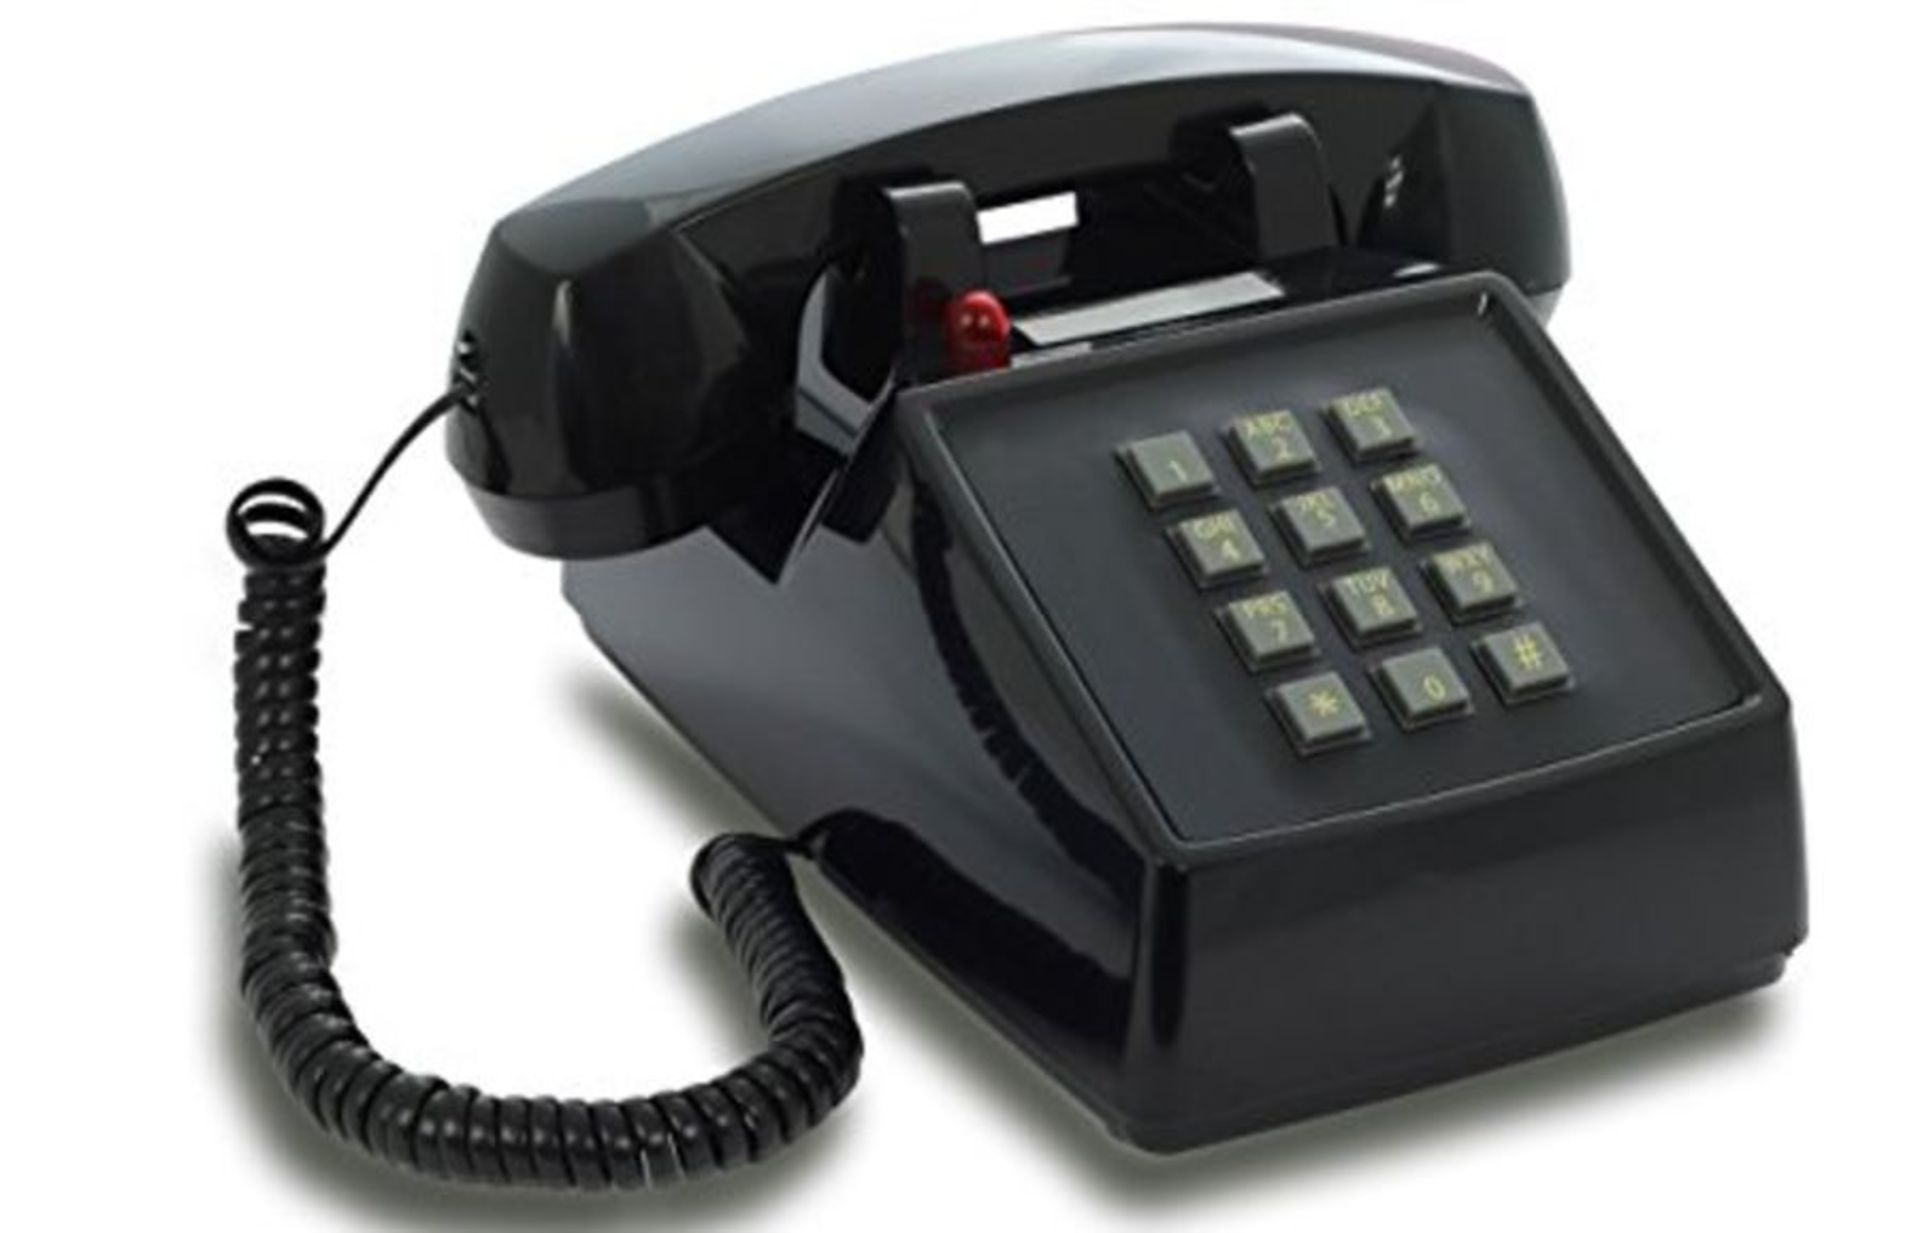 OPIS PushMeFon cable: 1970s inspired fixed-line push-button retro telephone with class